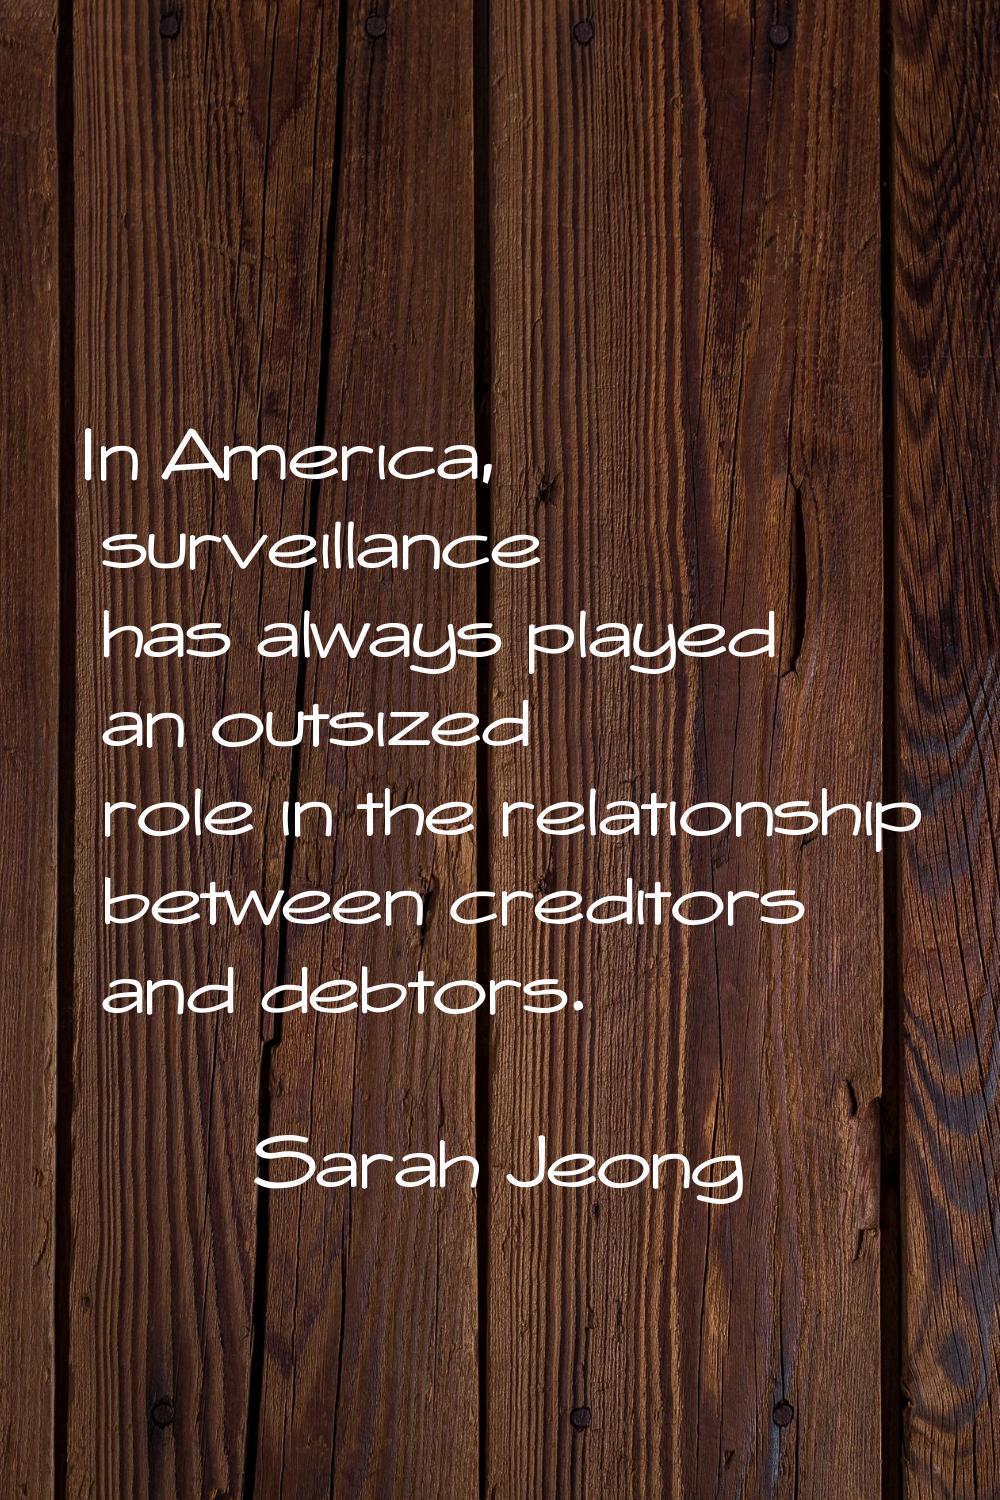 In America, surveillance has always played an outsized role in the relationship between creditors a